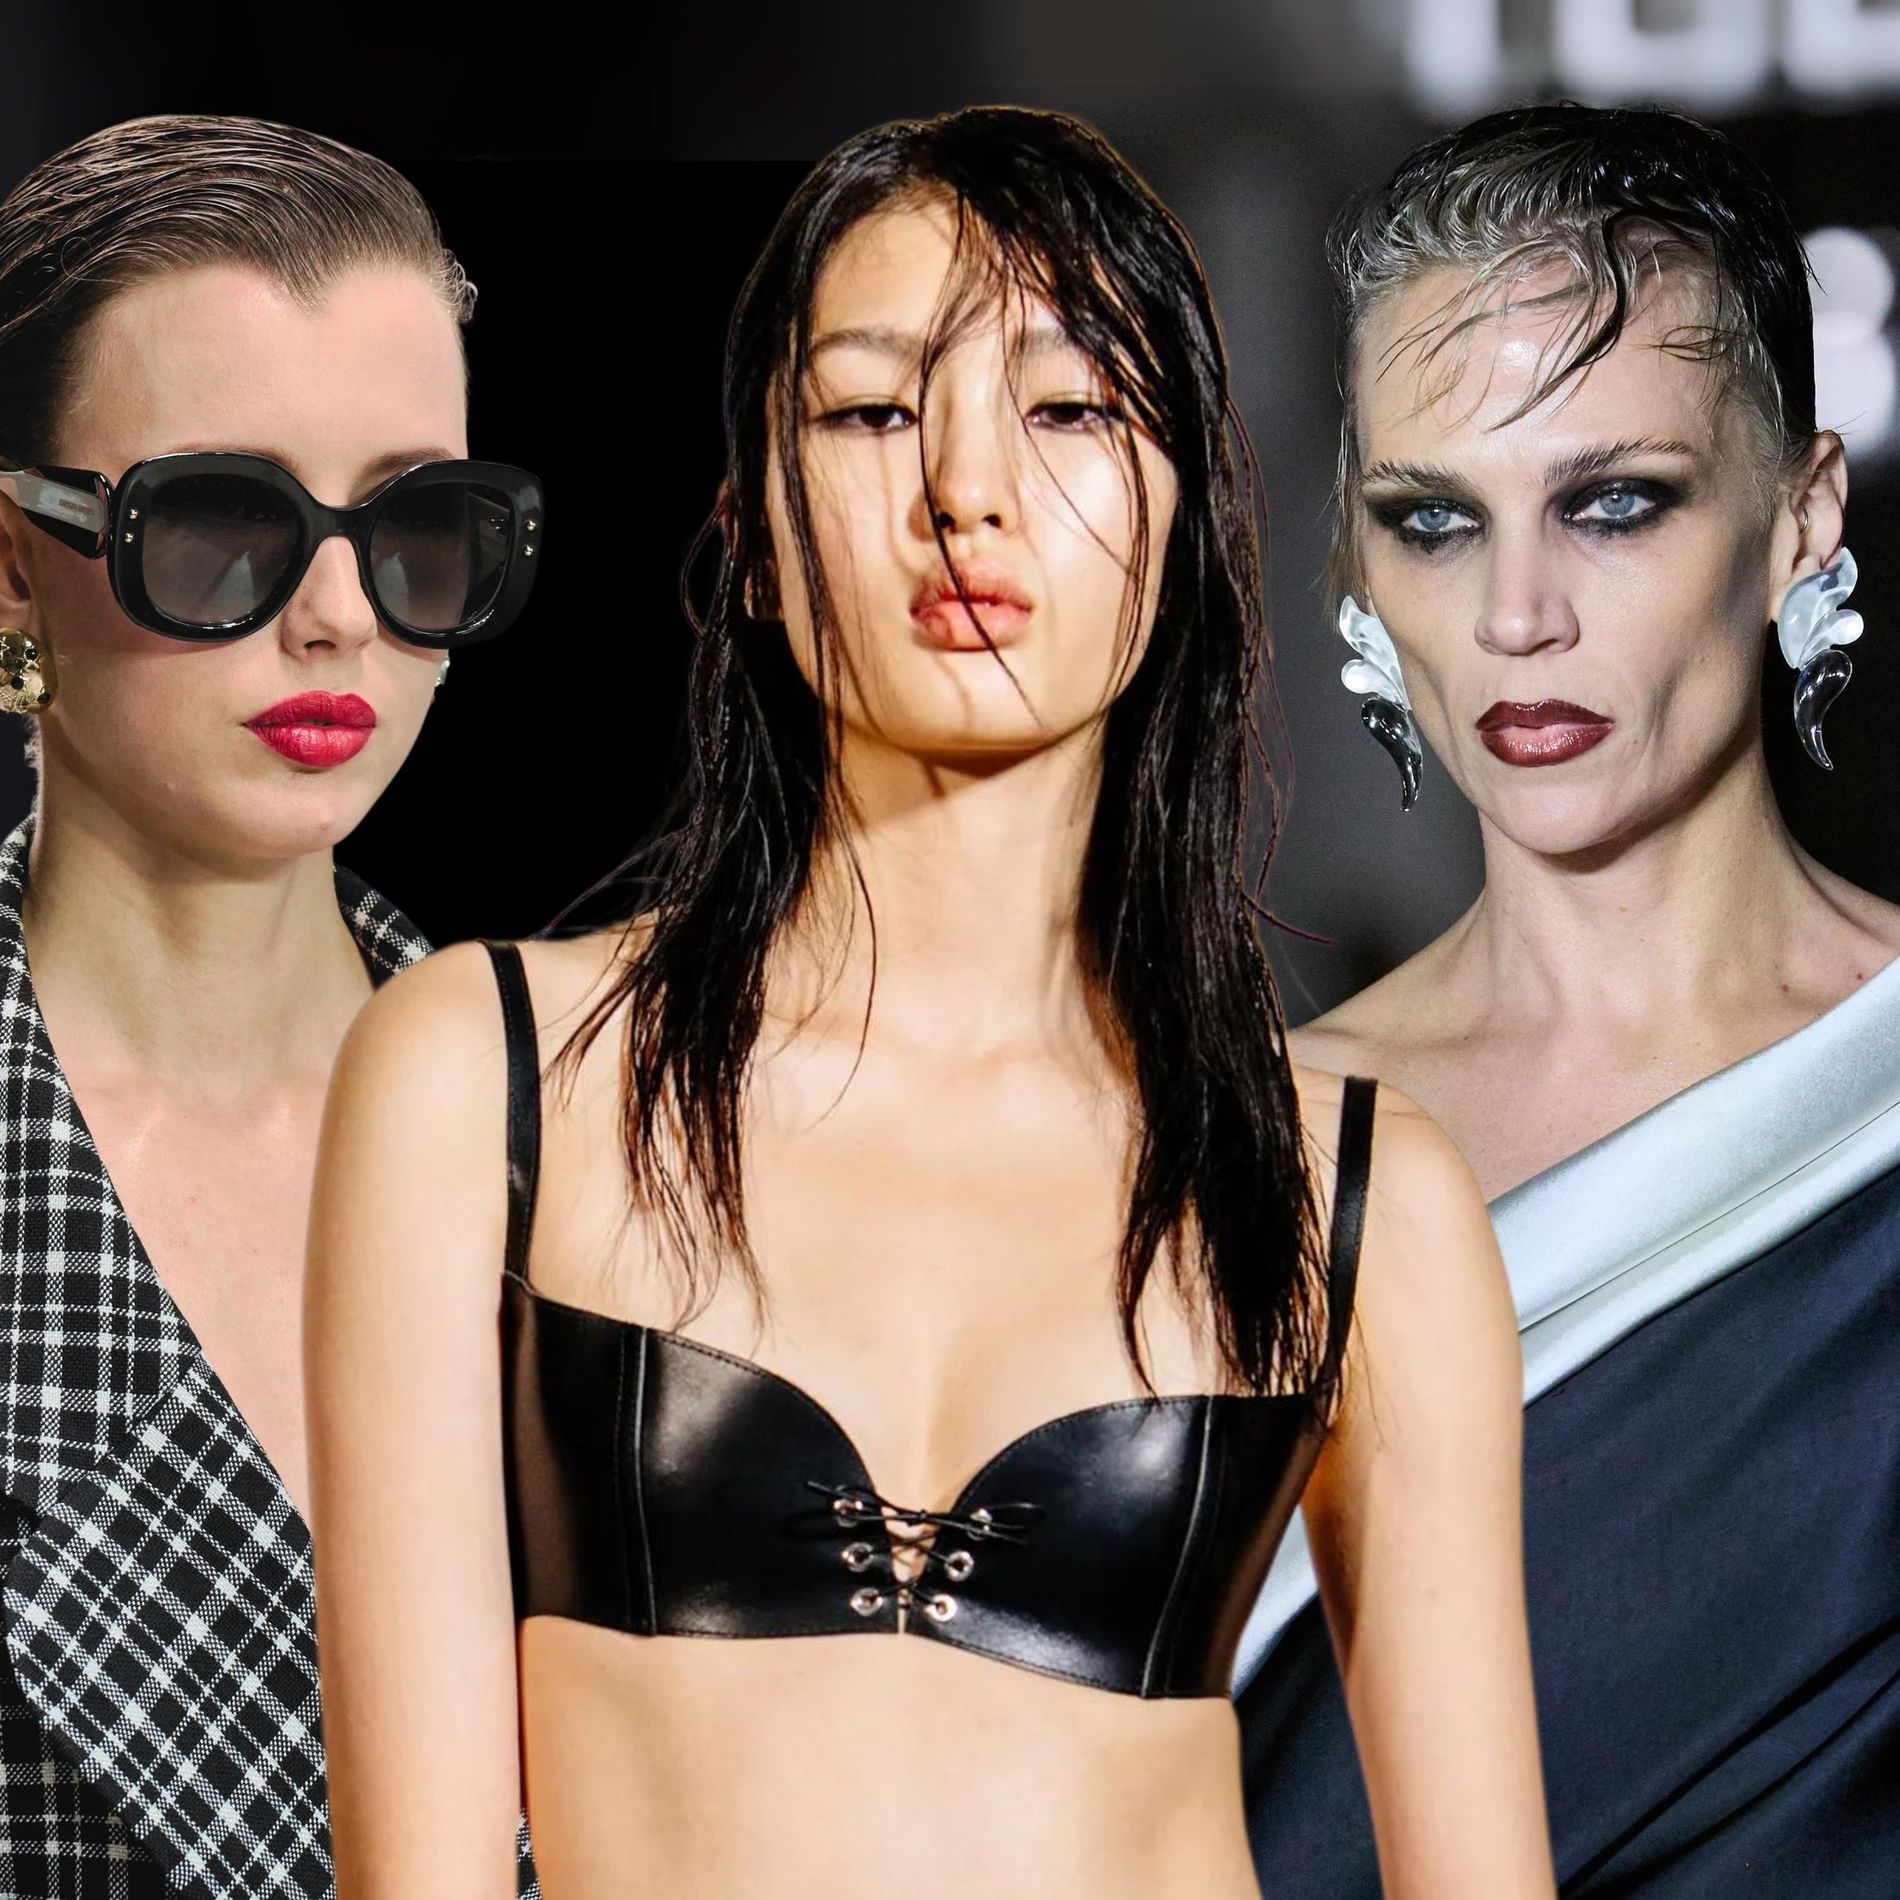 Red lips, black smokey eyes, and copious amount of gel were the three beauty tools in the MUA and hairstylist kit at New York Fashion Week – as exemplified by models walking Michael Kors, Ludovic De Saint Sernin, and Prabal Gurung